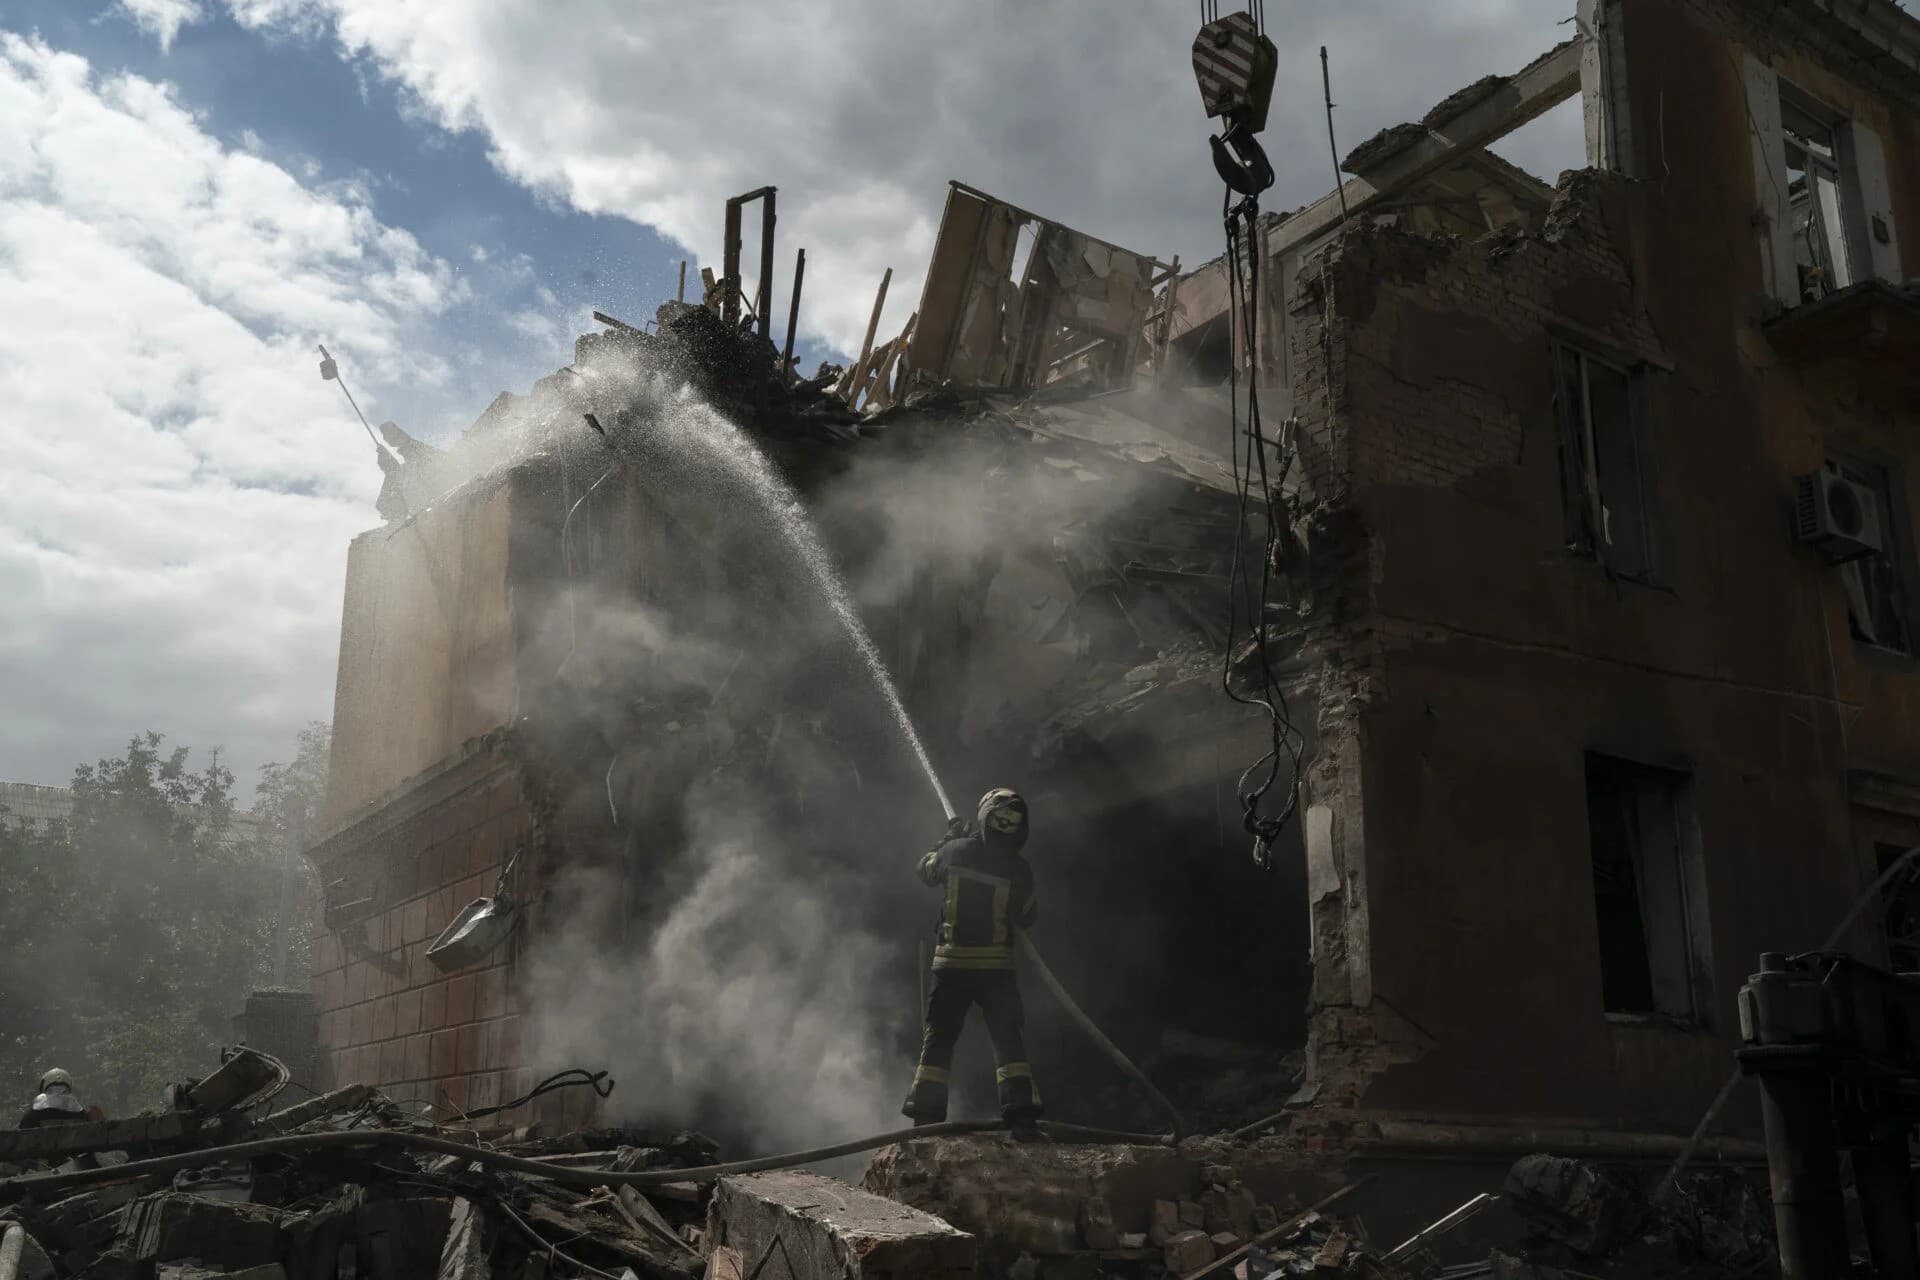 A firefighter works to extinguish a fire after a Russian attack that heavily damaged a residential building in Sloviansk